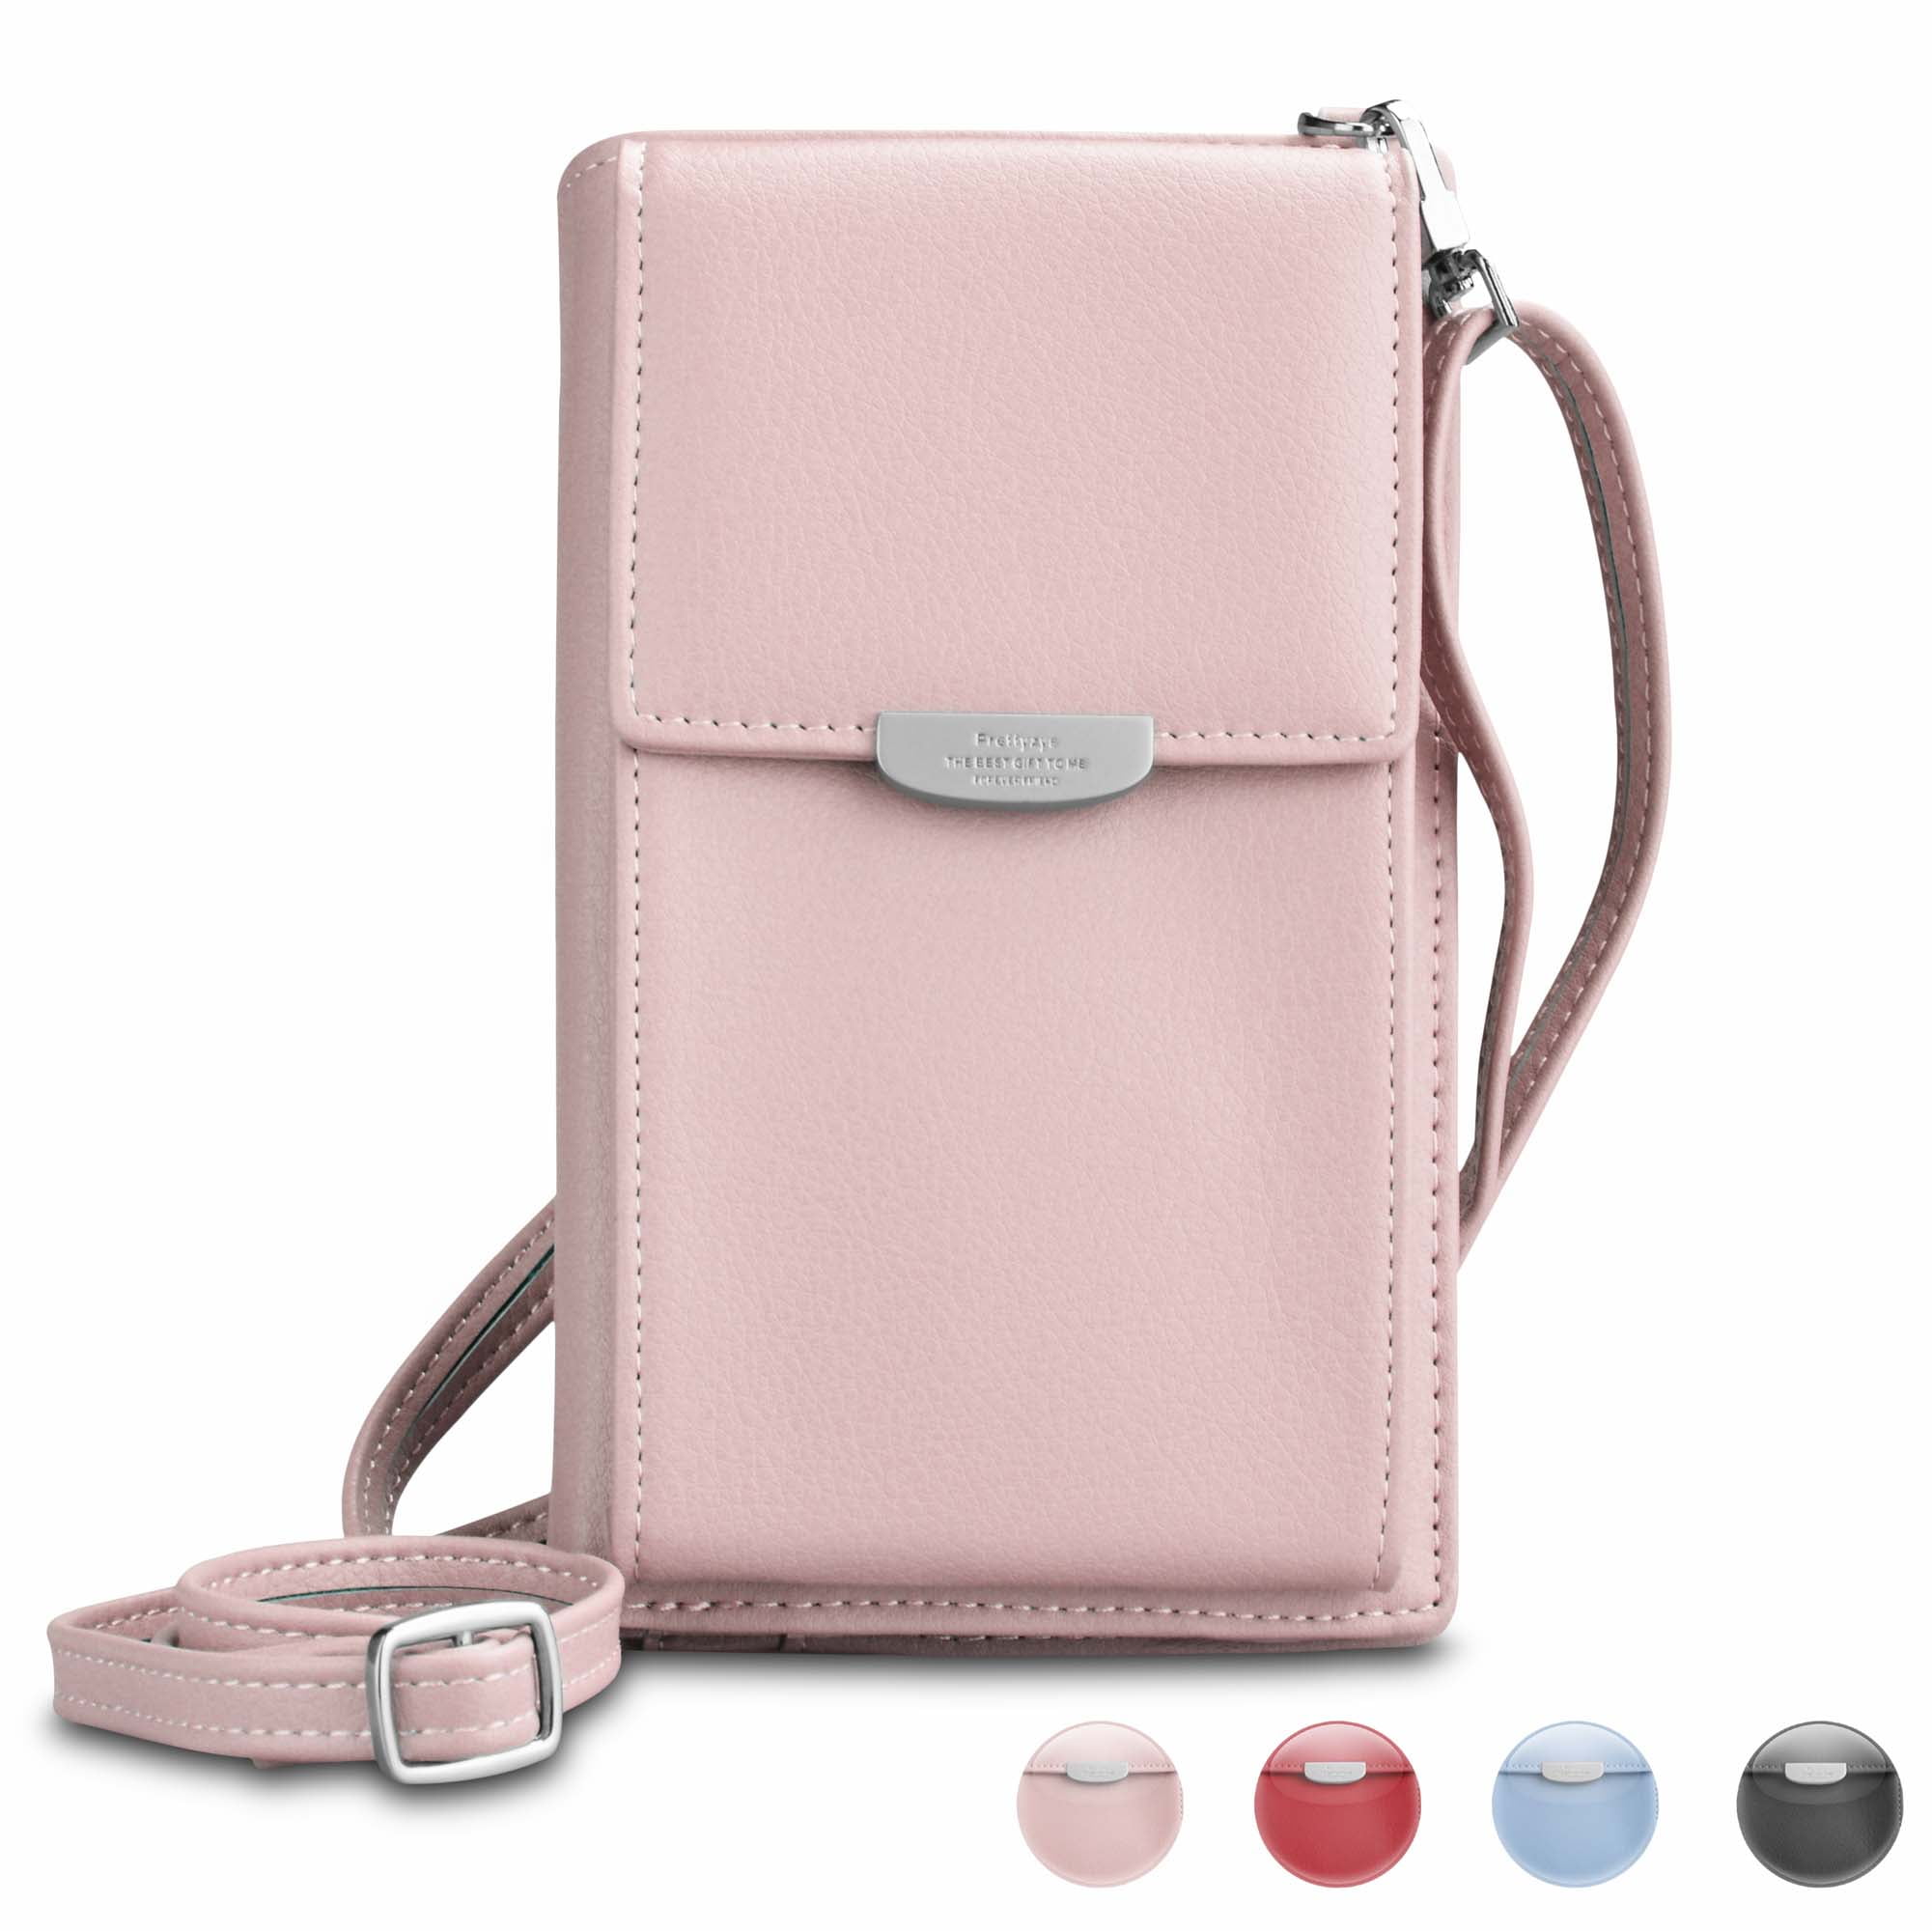 Crossbody Cell Phone Purse Wallet for Women Mini Cell Phone Pouch Shoulder Bag with Strap for Women PU Leather 